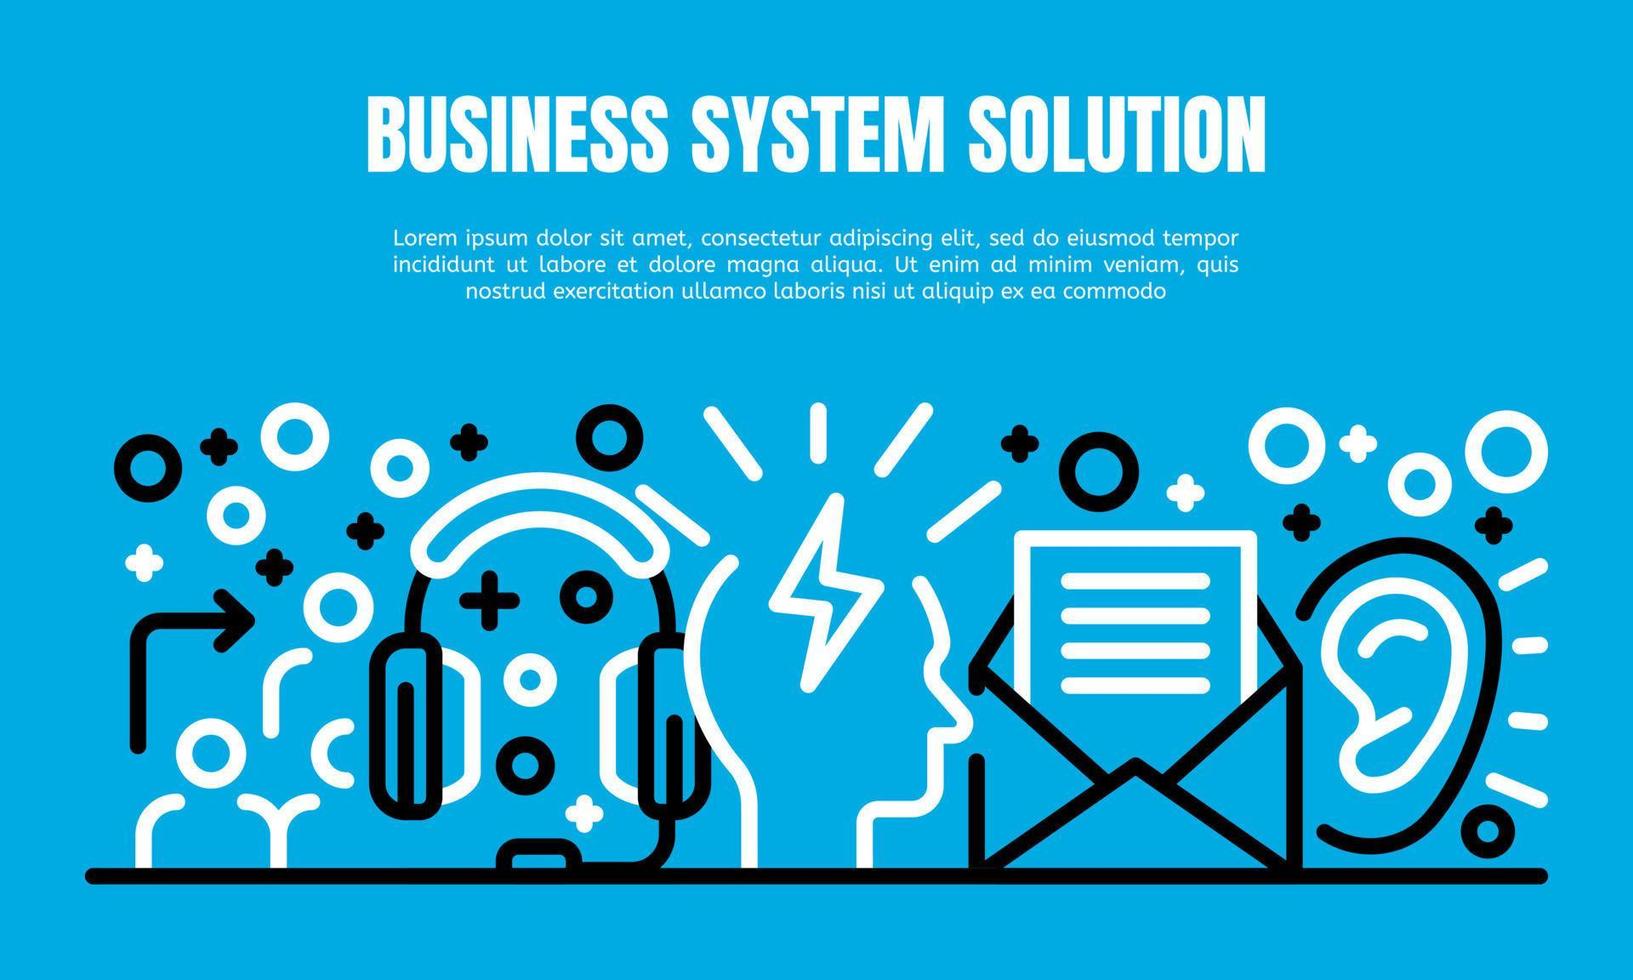 Business system solution banner, outline style vector